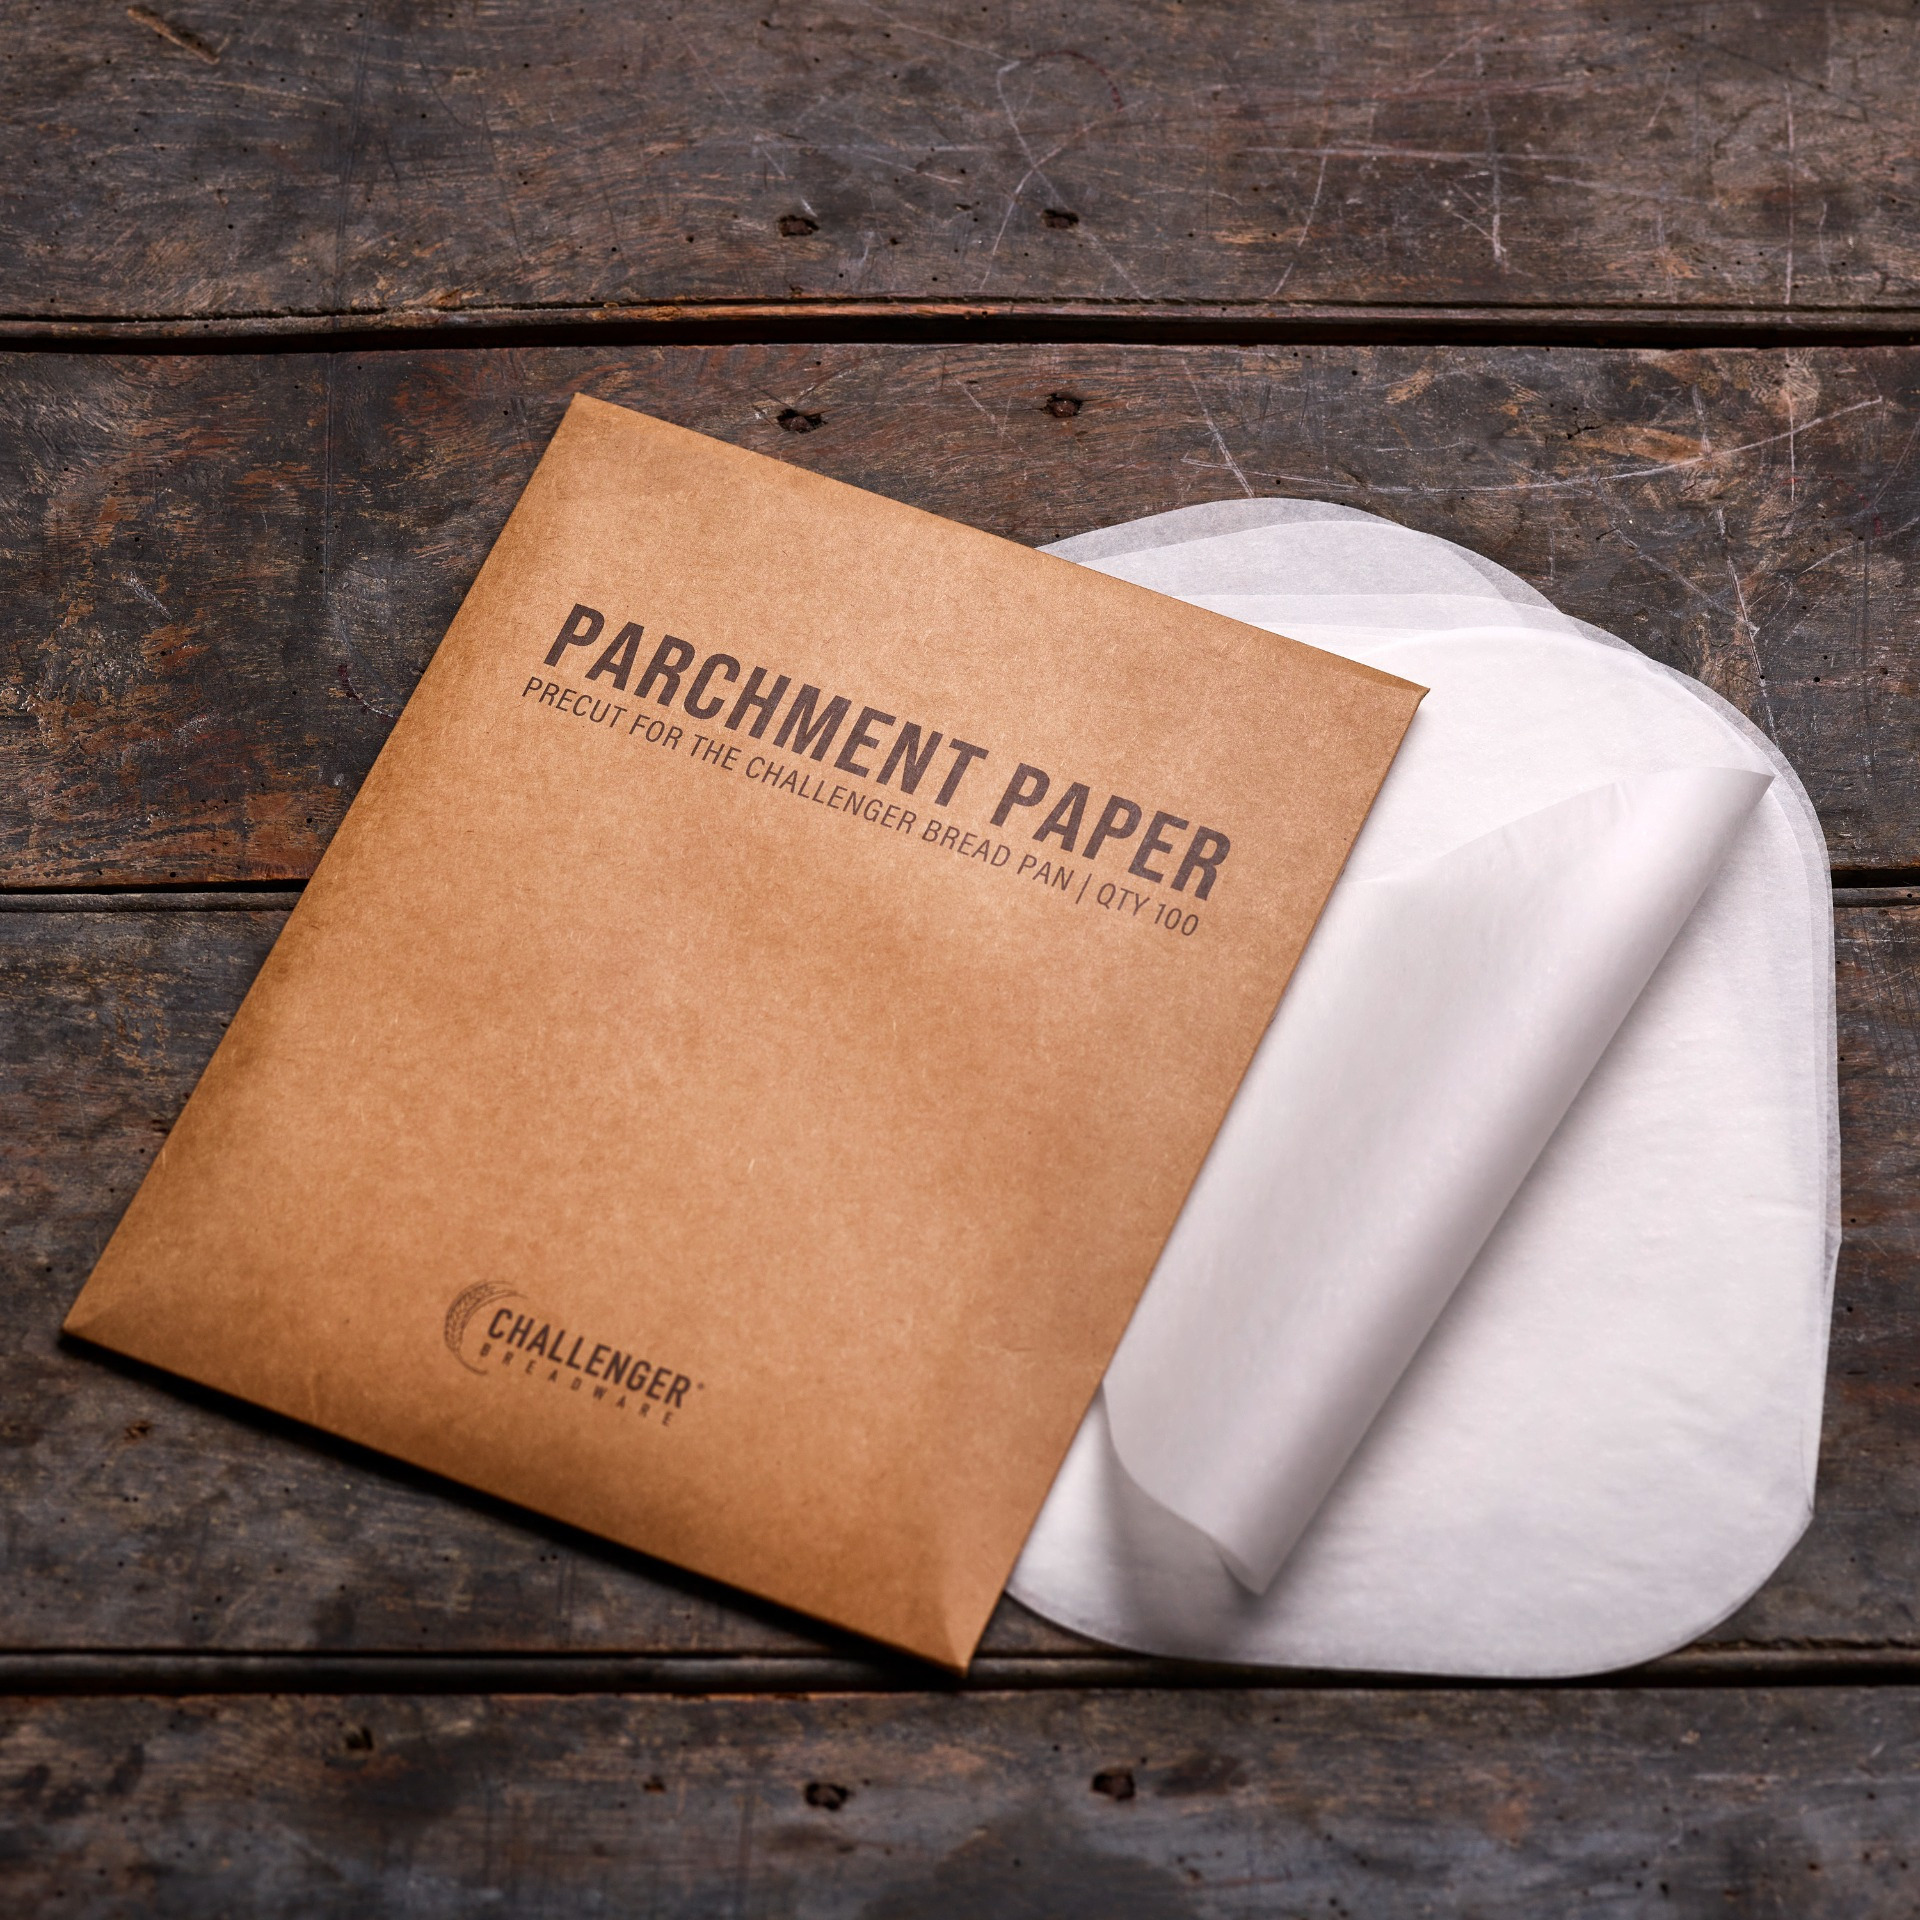 https://www.bakerybits.co.uk/media/catalog/product/cache/0096d319b30710f494afd1fc027ba44c/image/446175a6/challenger-pan-parchment-paper-liners-pack-100.jpg